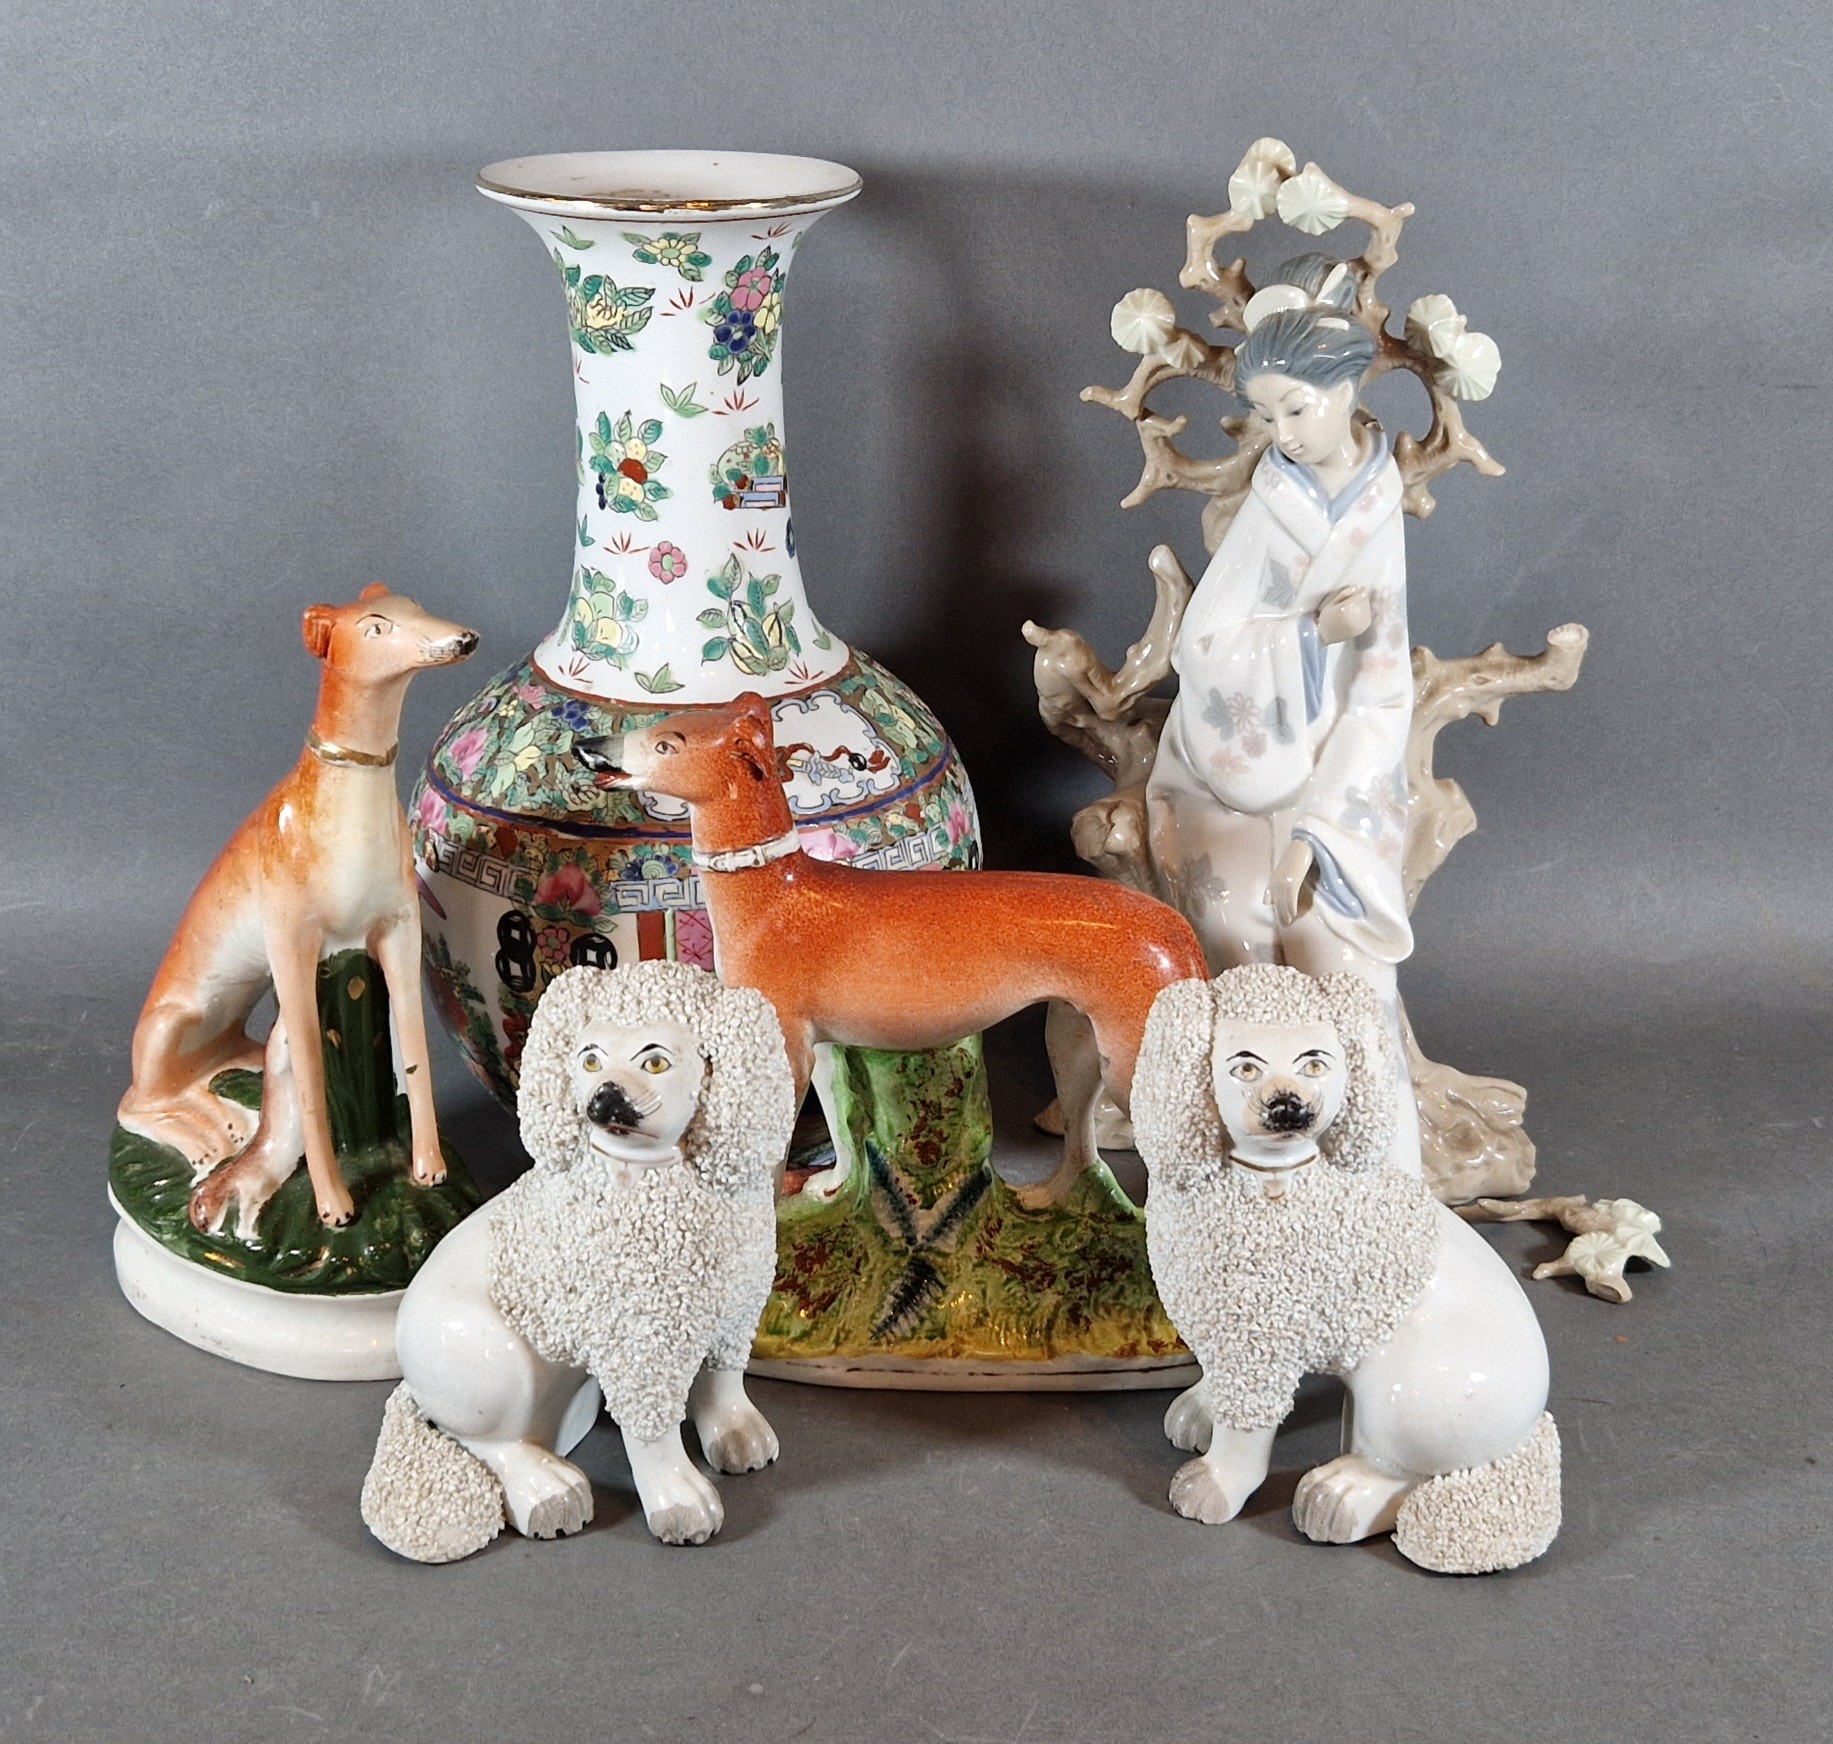 A pair of Staffordshire models of Spaniels together with two Staffordshire models of Greyhounds, a